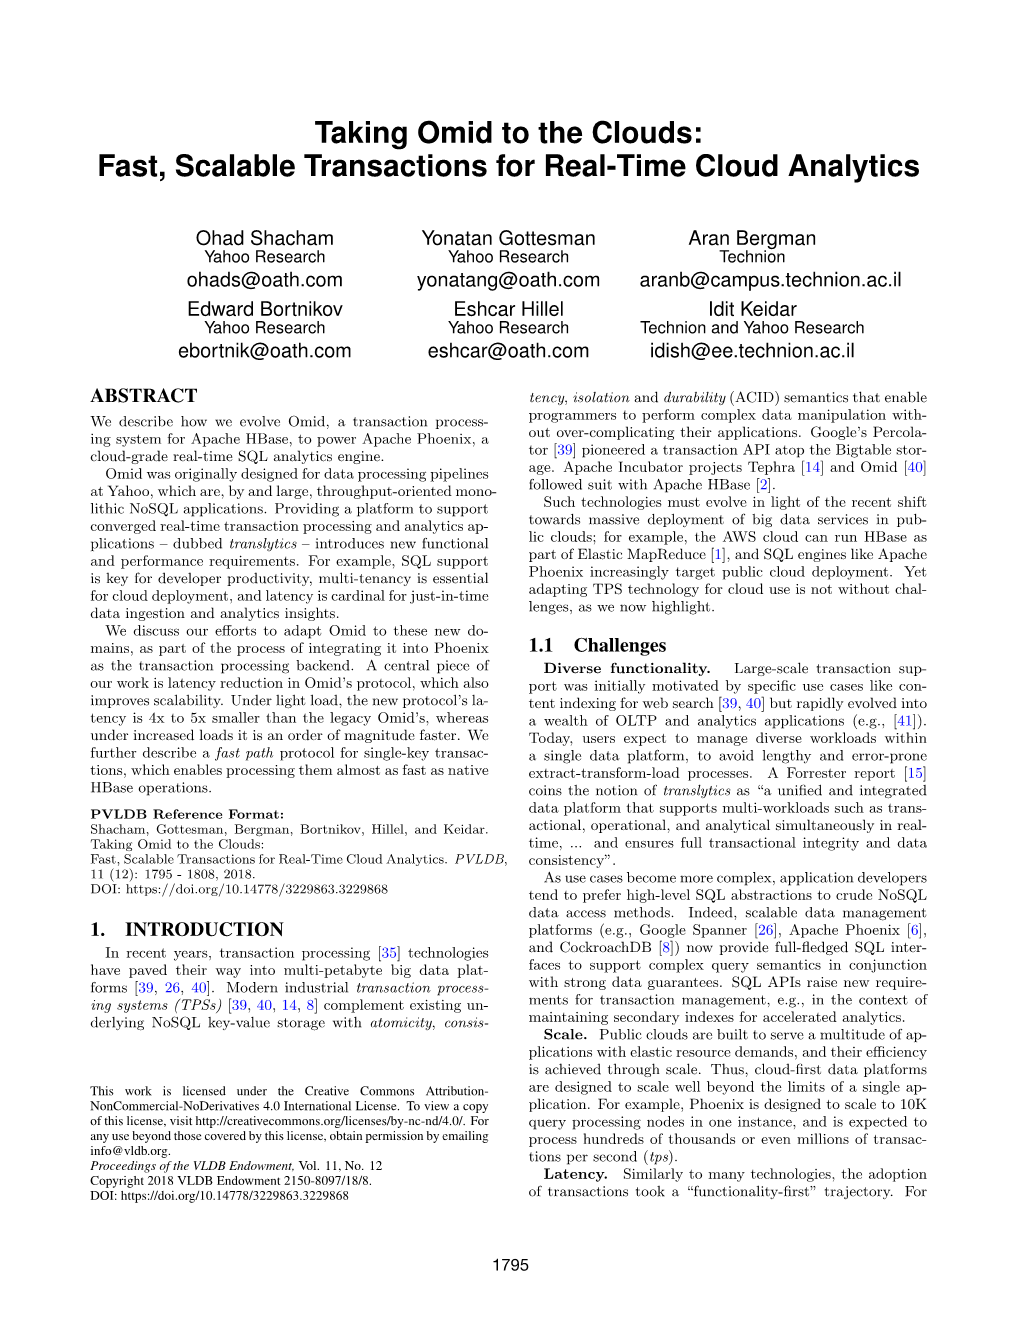 Taking Omid to the Clouds: Fast, Scalable Transactions for Real-Time Cloud Analytics